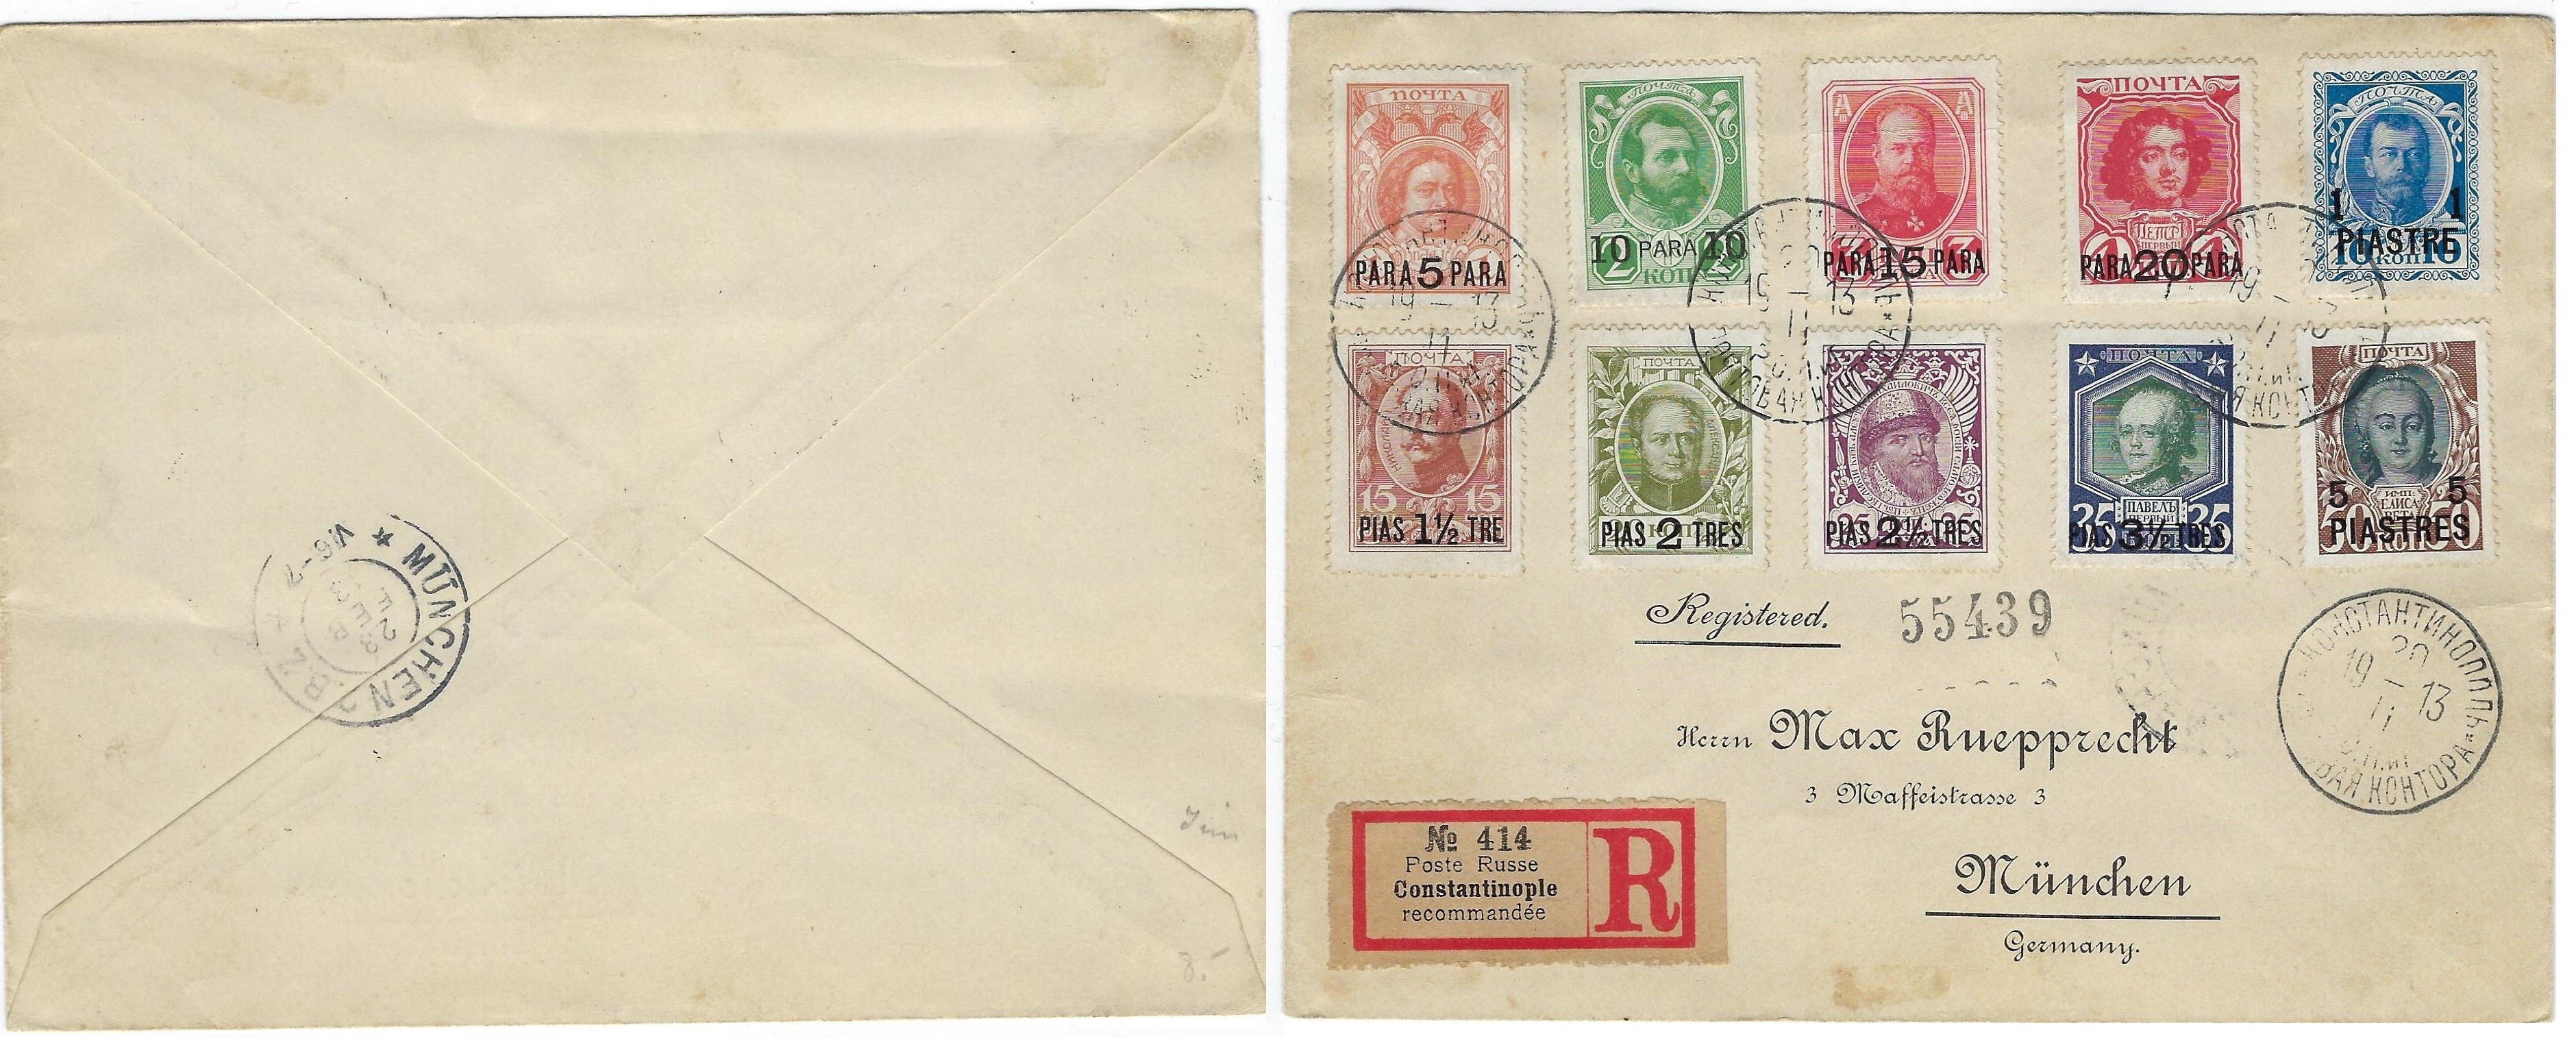 Russia Postal History - Offices in Turkey. Constantinopol Scott 10ab 